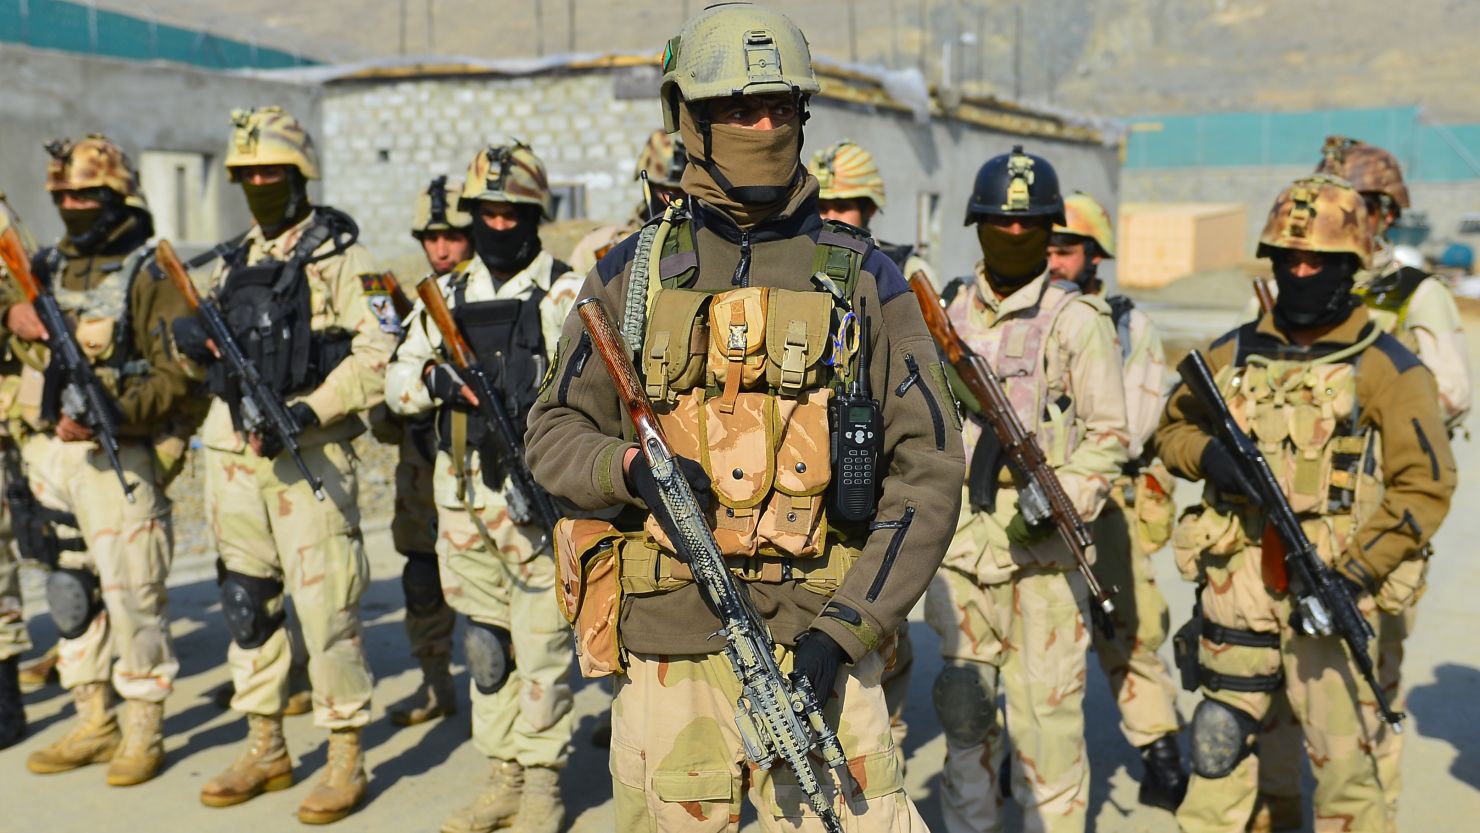 Afghan Crisis Response Unit forces stand in formation during an exercise at their camp on the outskirts of Kabul on Sunday.